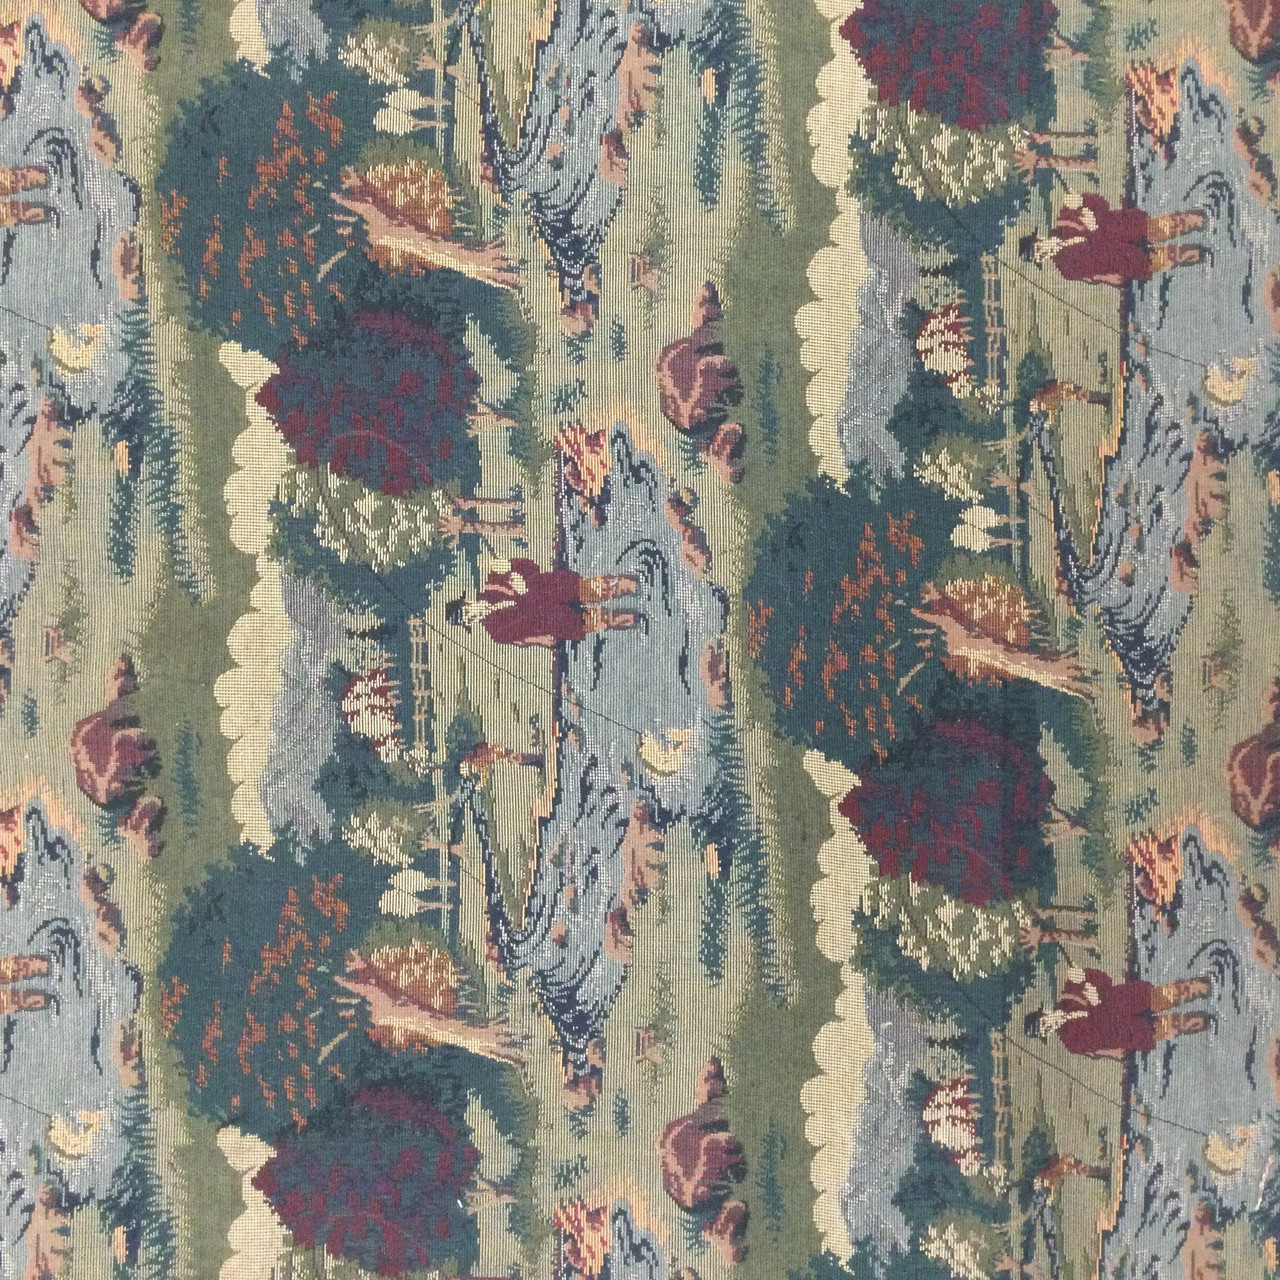 Fly Fishing Tapestry Fabric, Green / Red / Brown / Blue, Medium Weight  Upholstery, 54 Wide, By the Yard